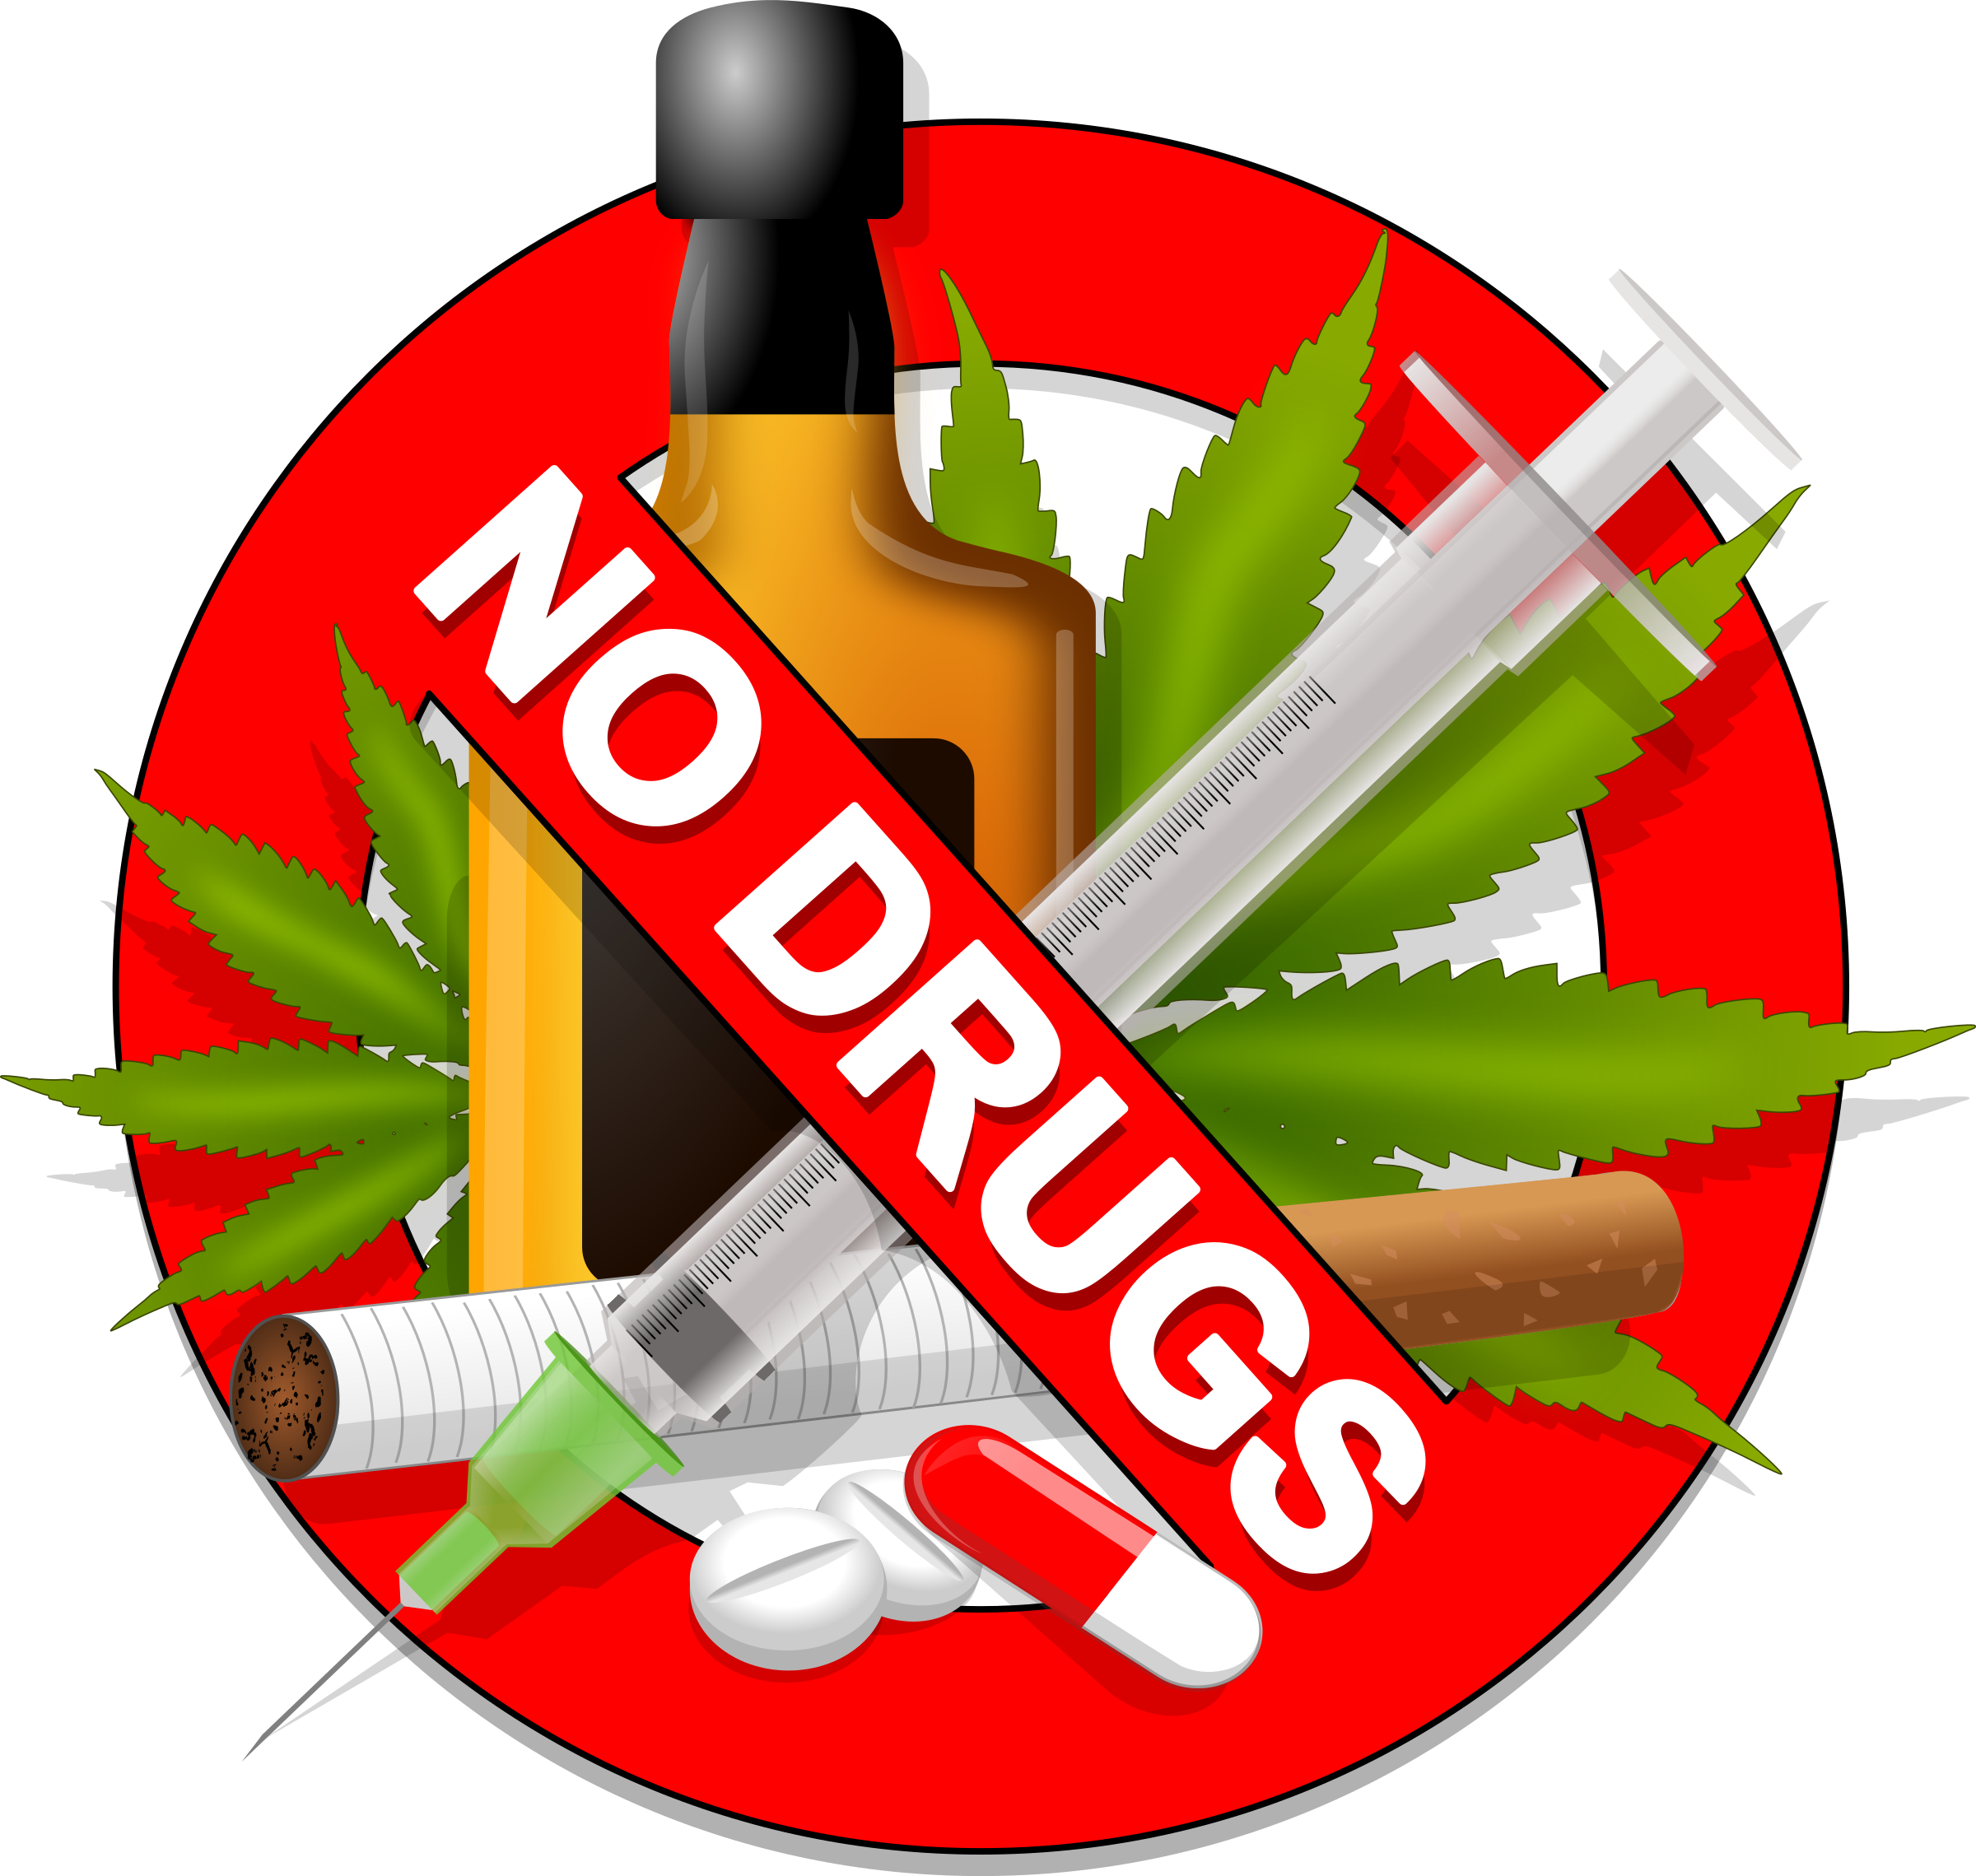 Say No To Drugs!